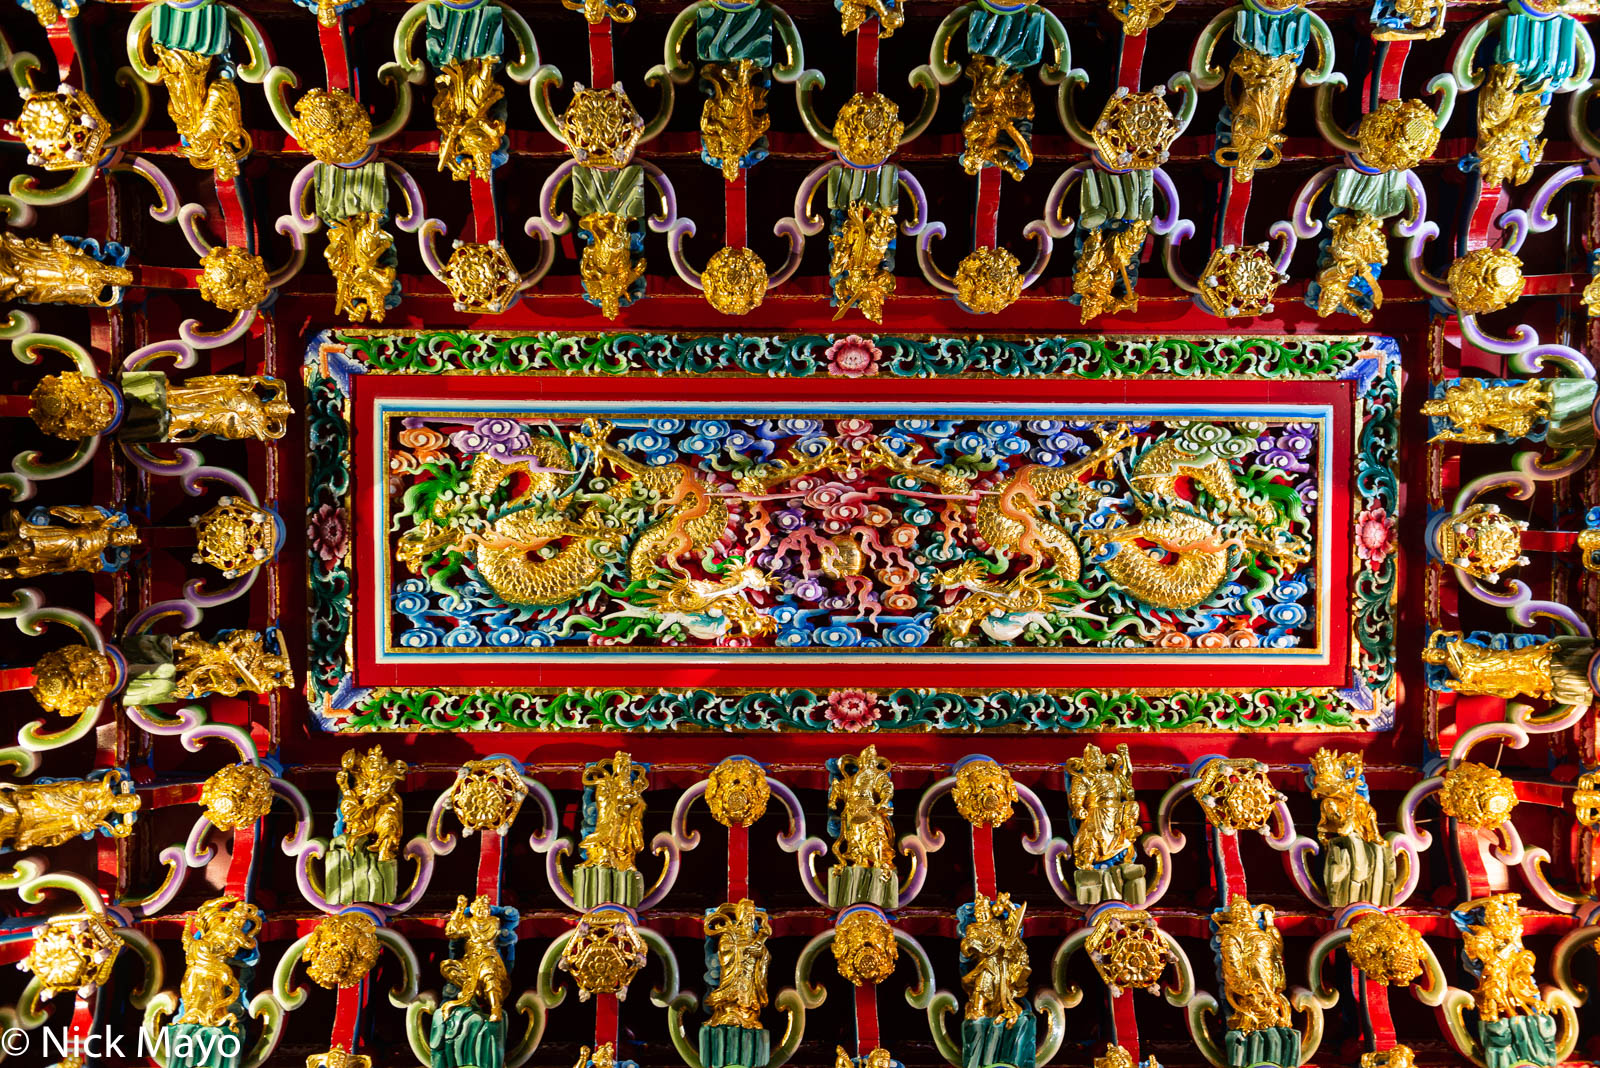 A ceiling at the Zhulinshan Guanyin temple at Linkou.